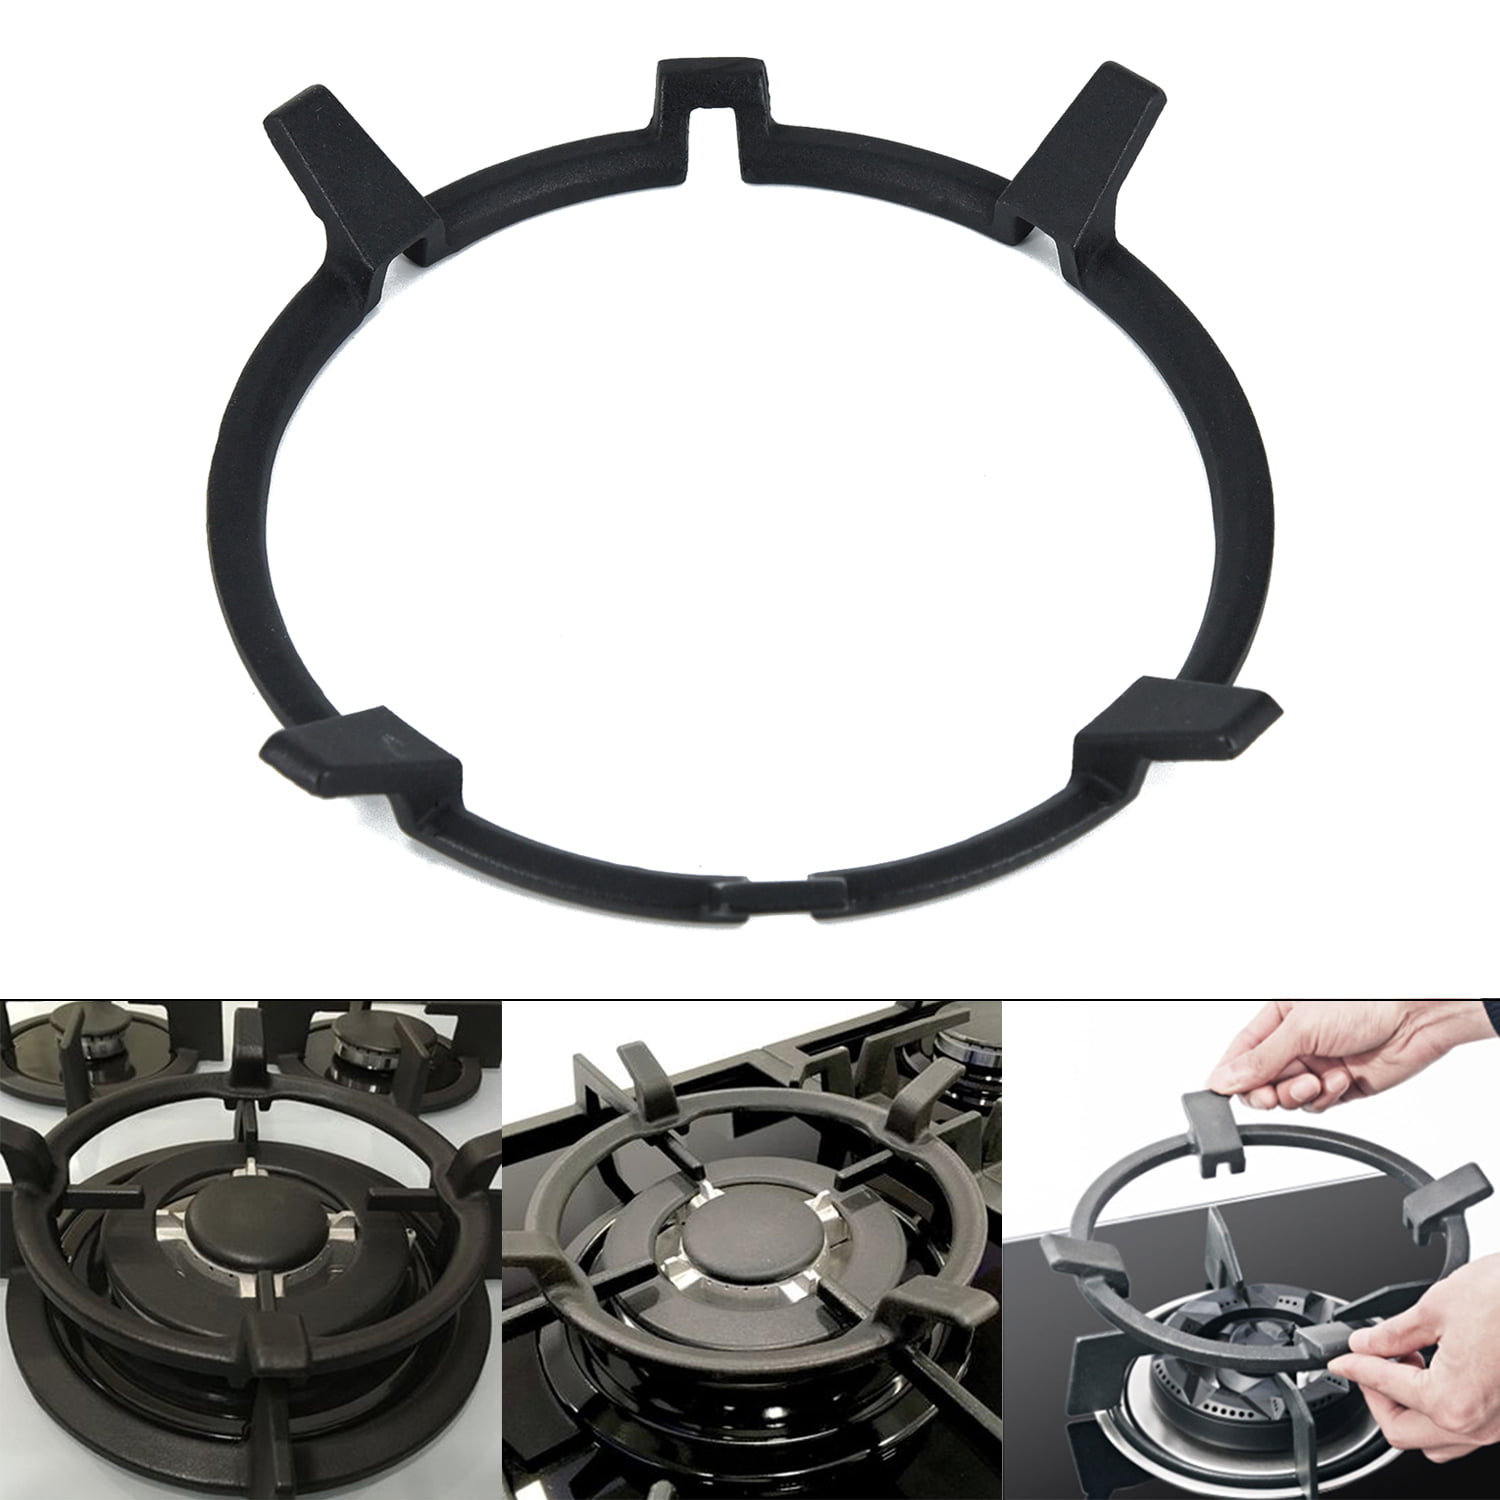 Bopfimer Universal Cast Iron Wok Pan Support Rack Stand for Burners Gas Hobs and Cookers Home Garden Supplies 